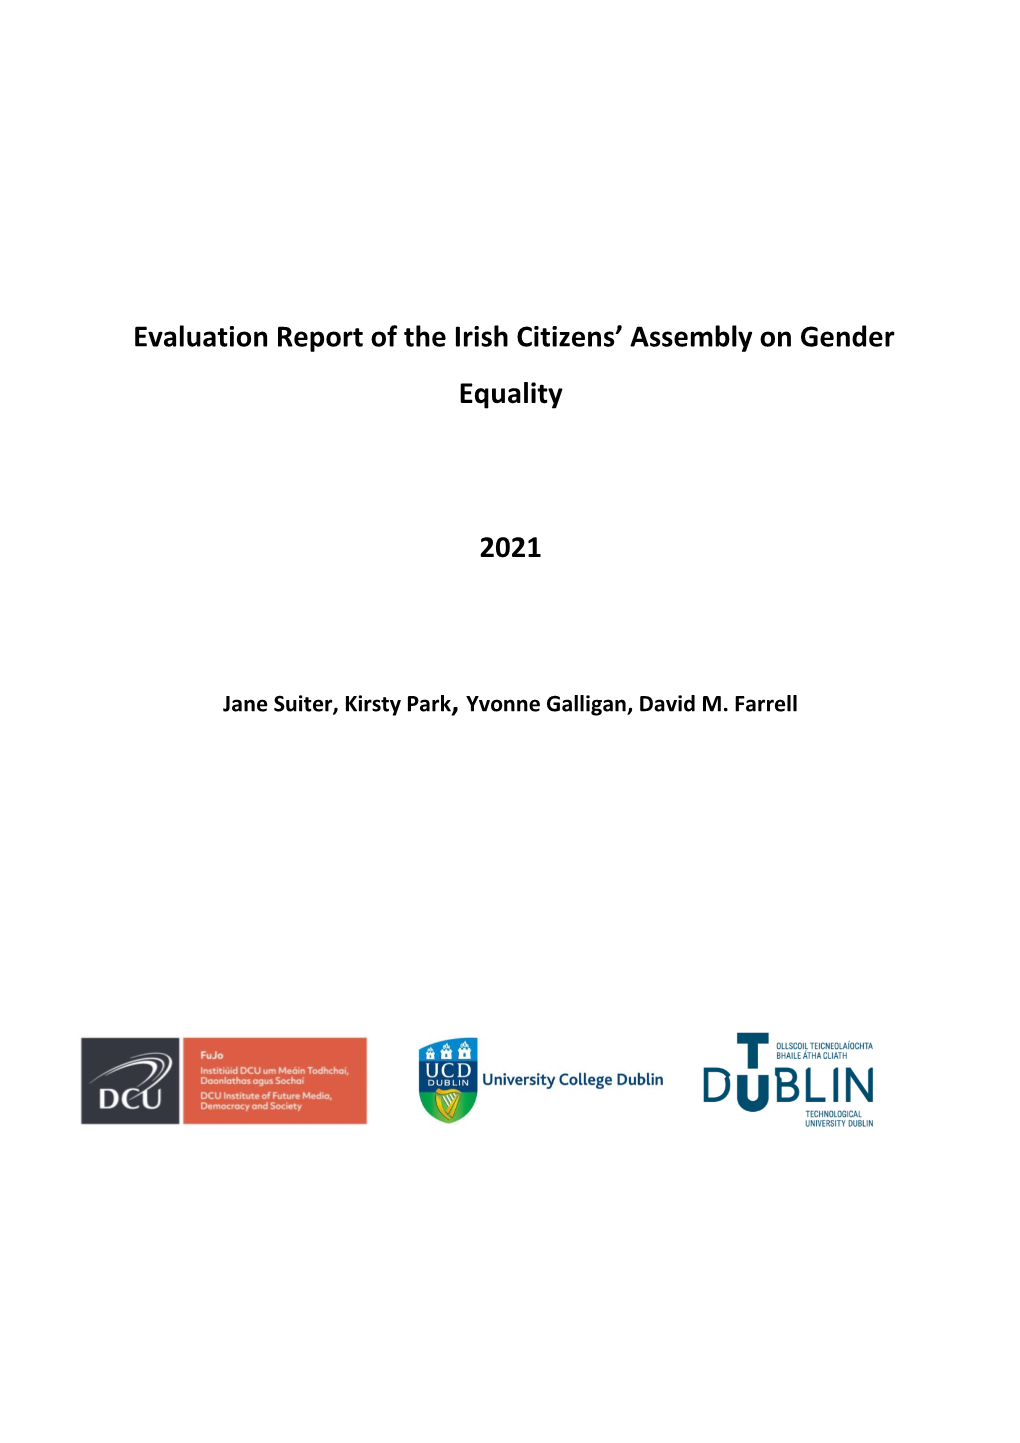 Evaluation Report of the Irish Citizens' Assembly on Gender Equality 2021